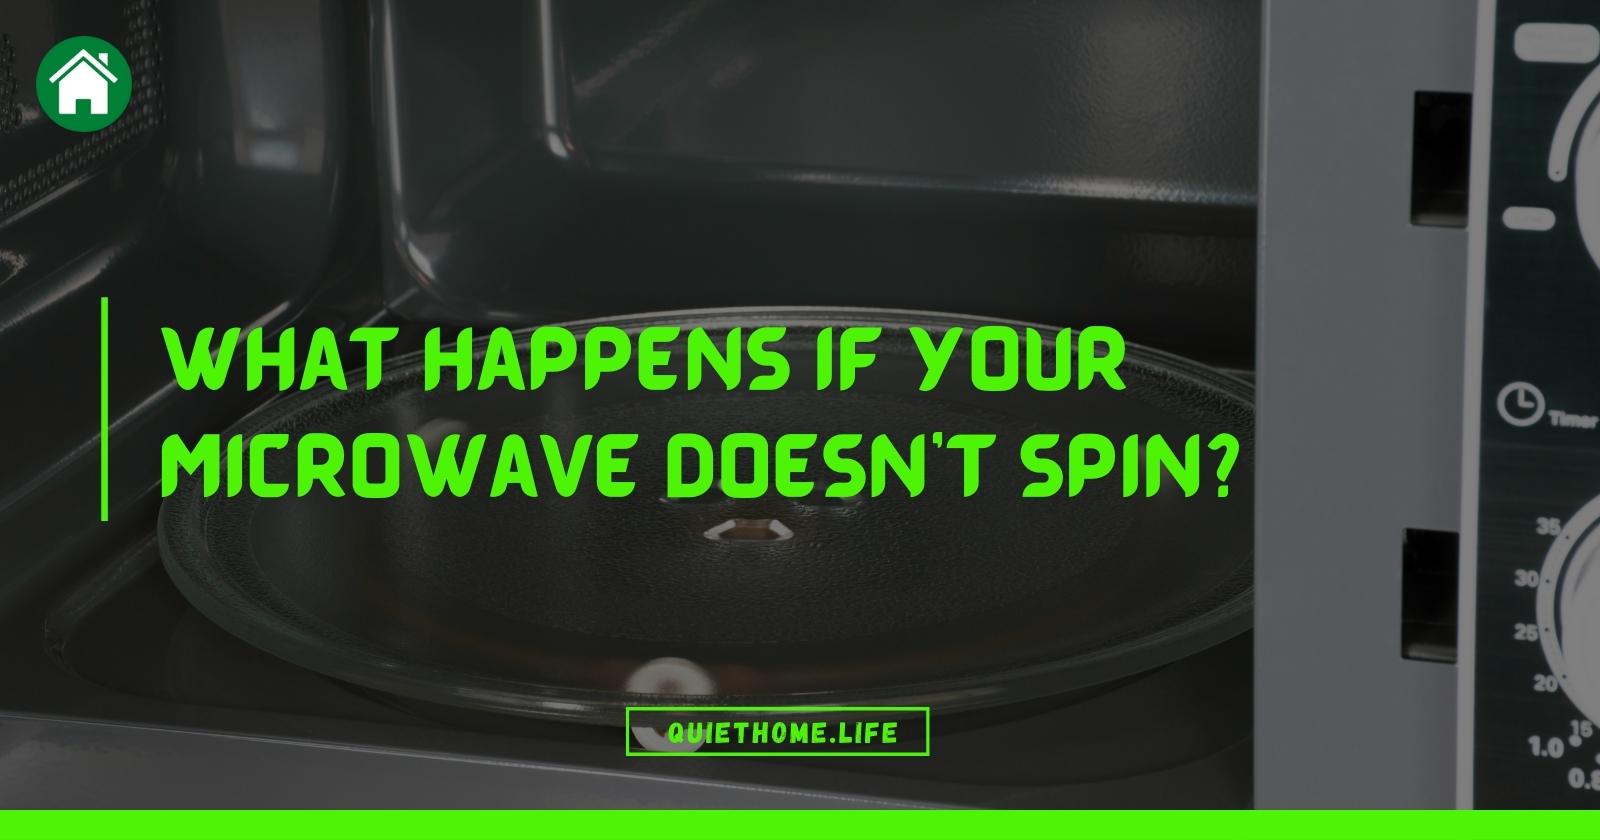 What Happens If Your Microwave Doesn't Spin